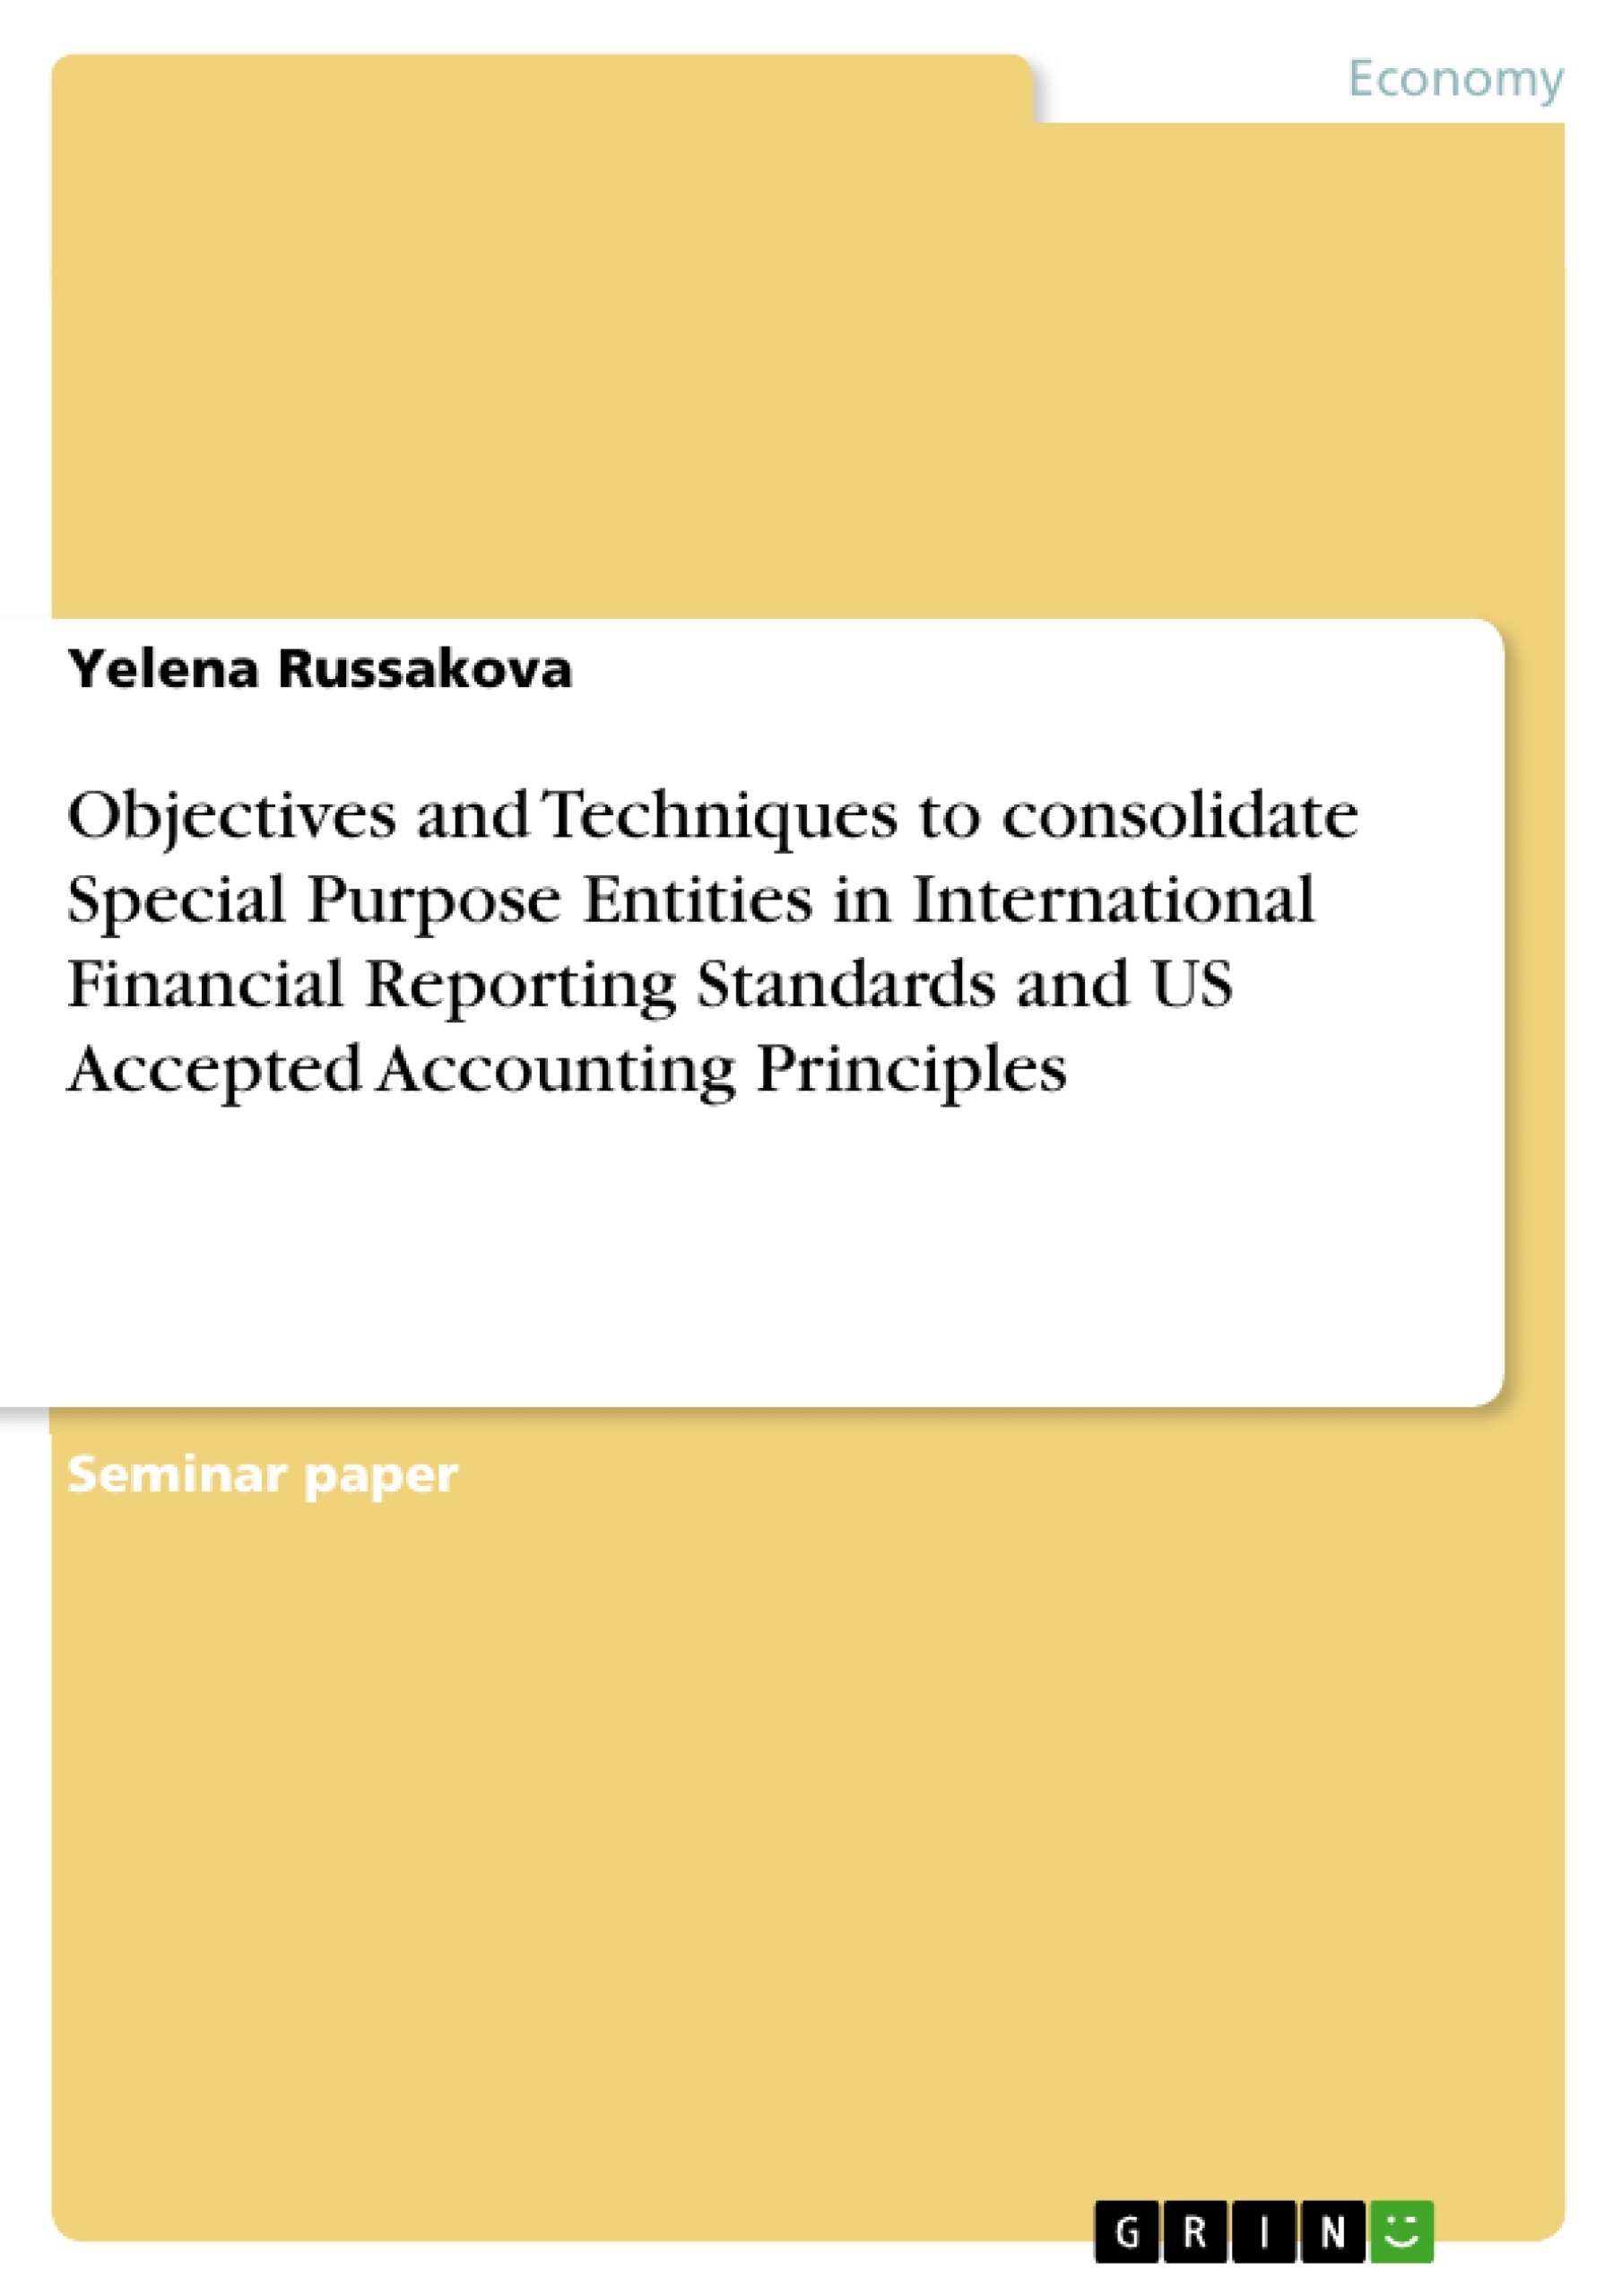 Title: Objectives and Techniques to consolidate Special Purpose Entities in International Financial Reporting Standards and US Accepted Accounting Principles